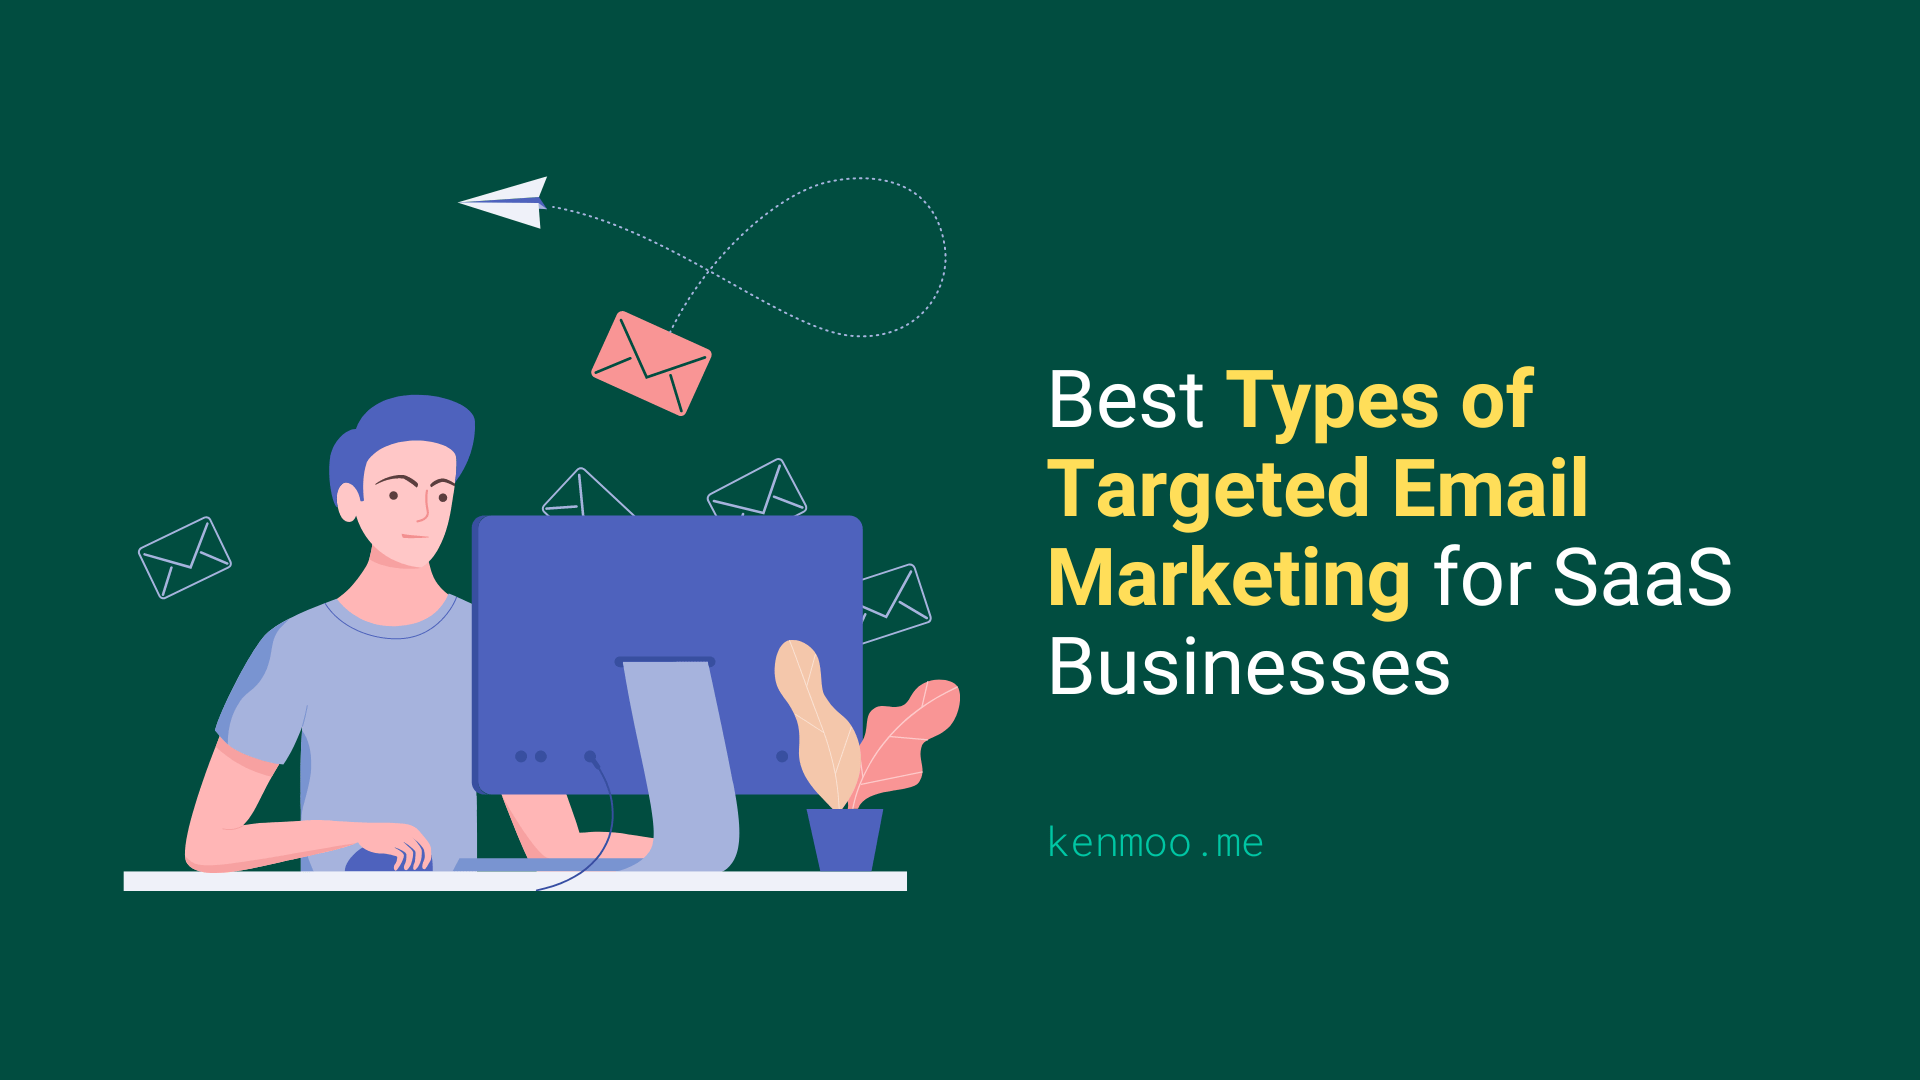 Best Types of Targeted Email Marketing for SaaS Businesses